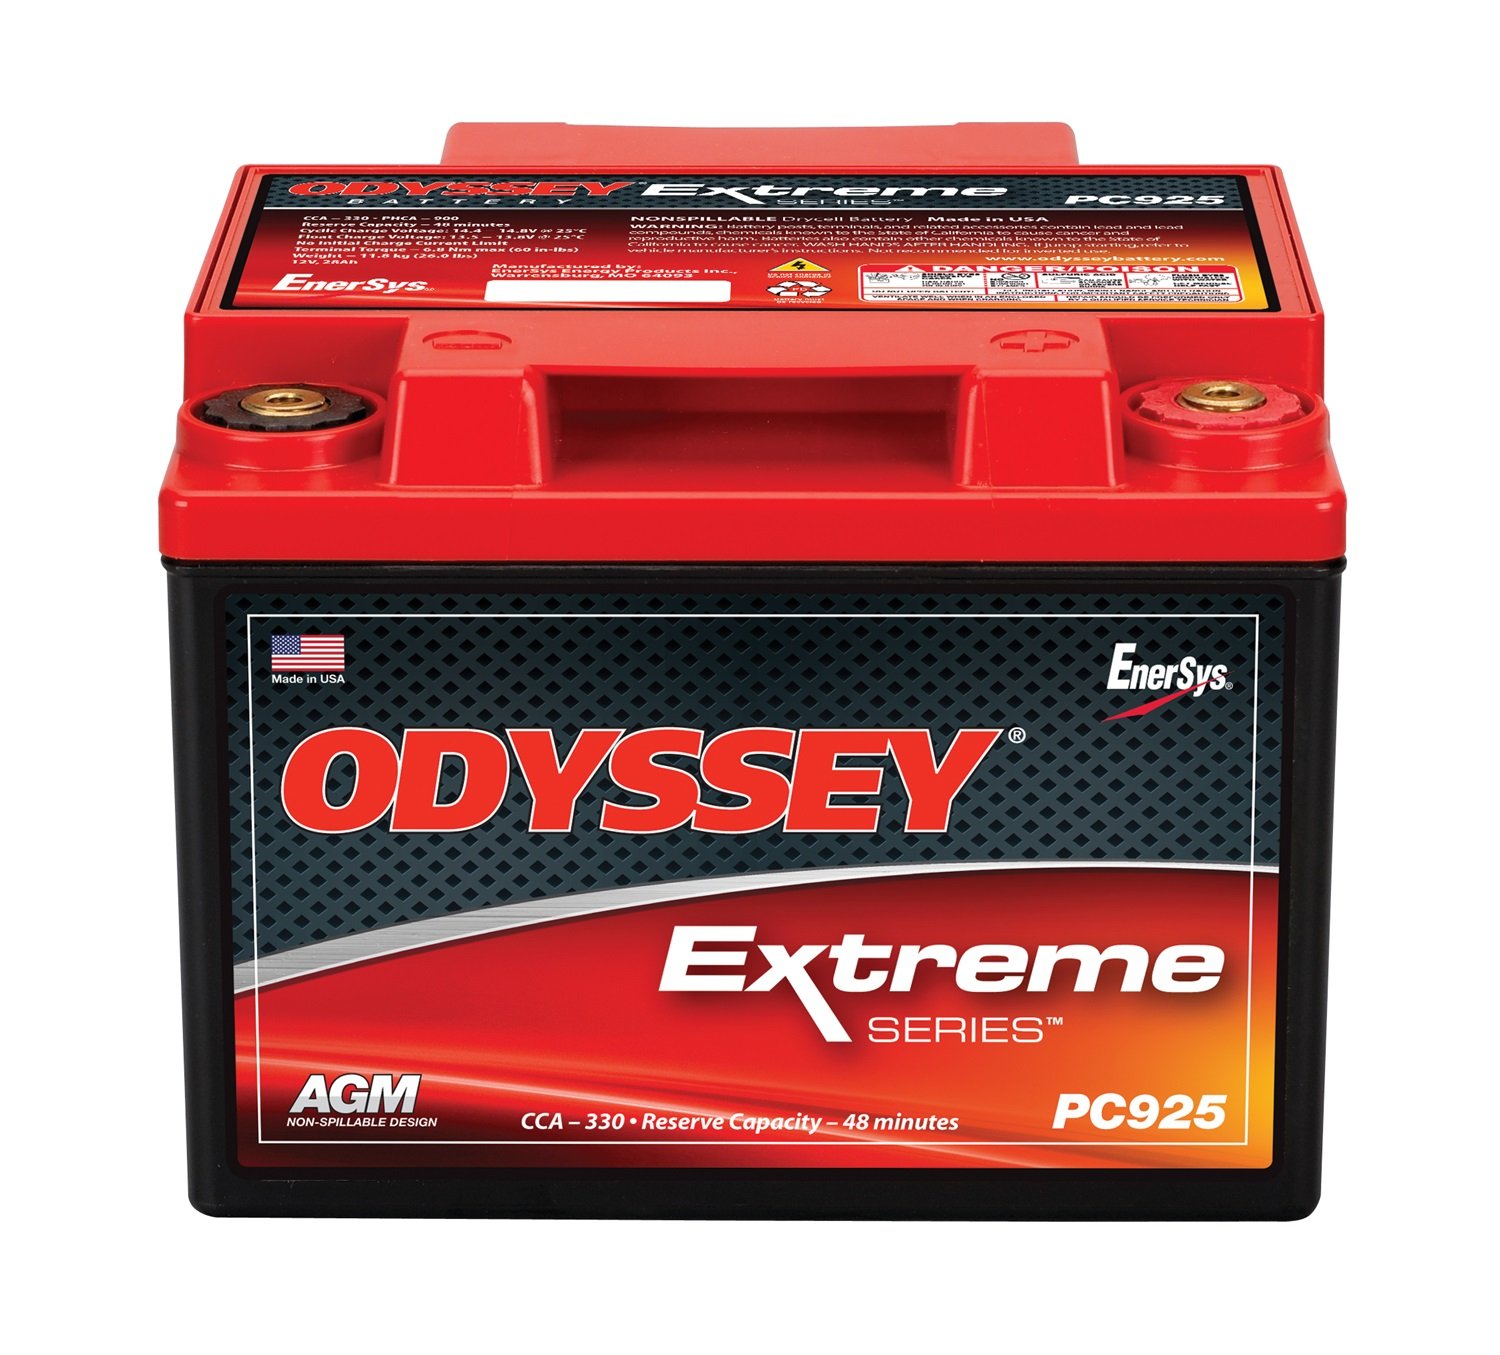 ODYSSEY Extreme Battery - ODS-AGM28L (PC925) - image 4 of 4